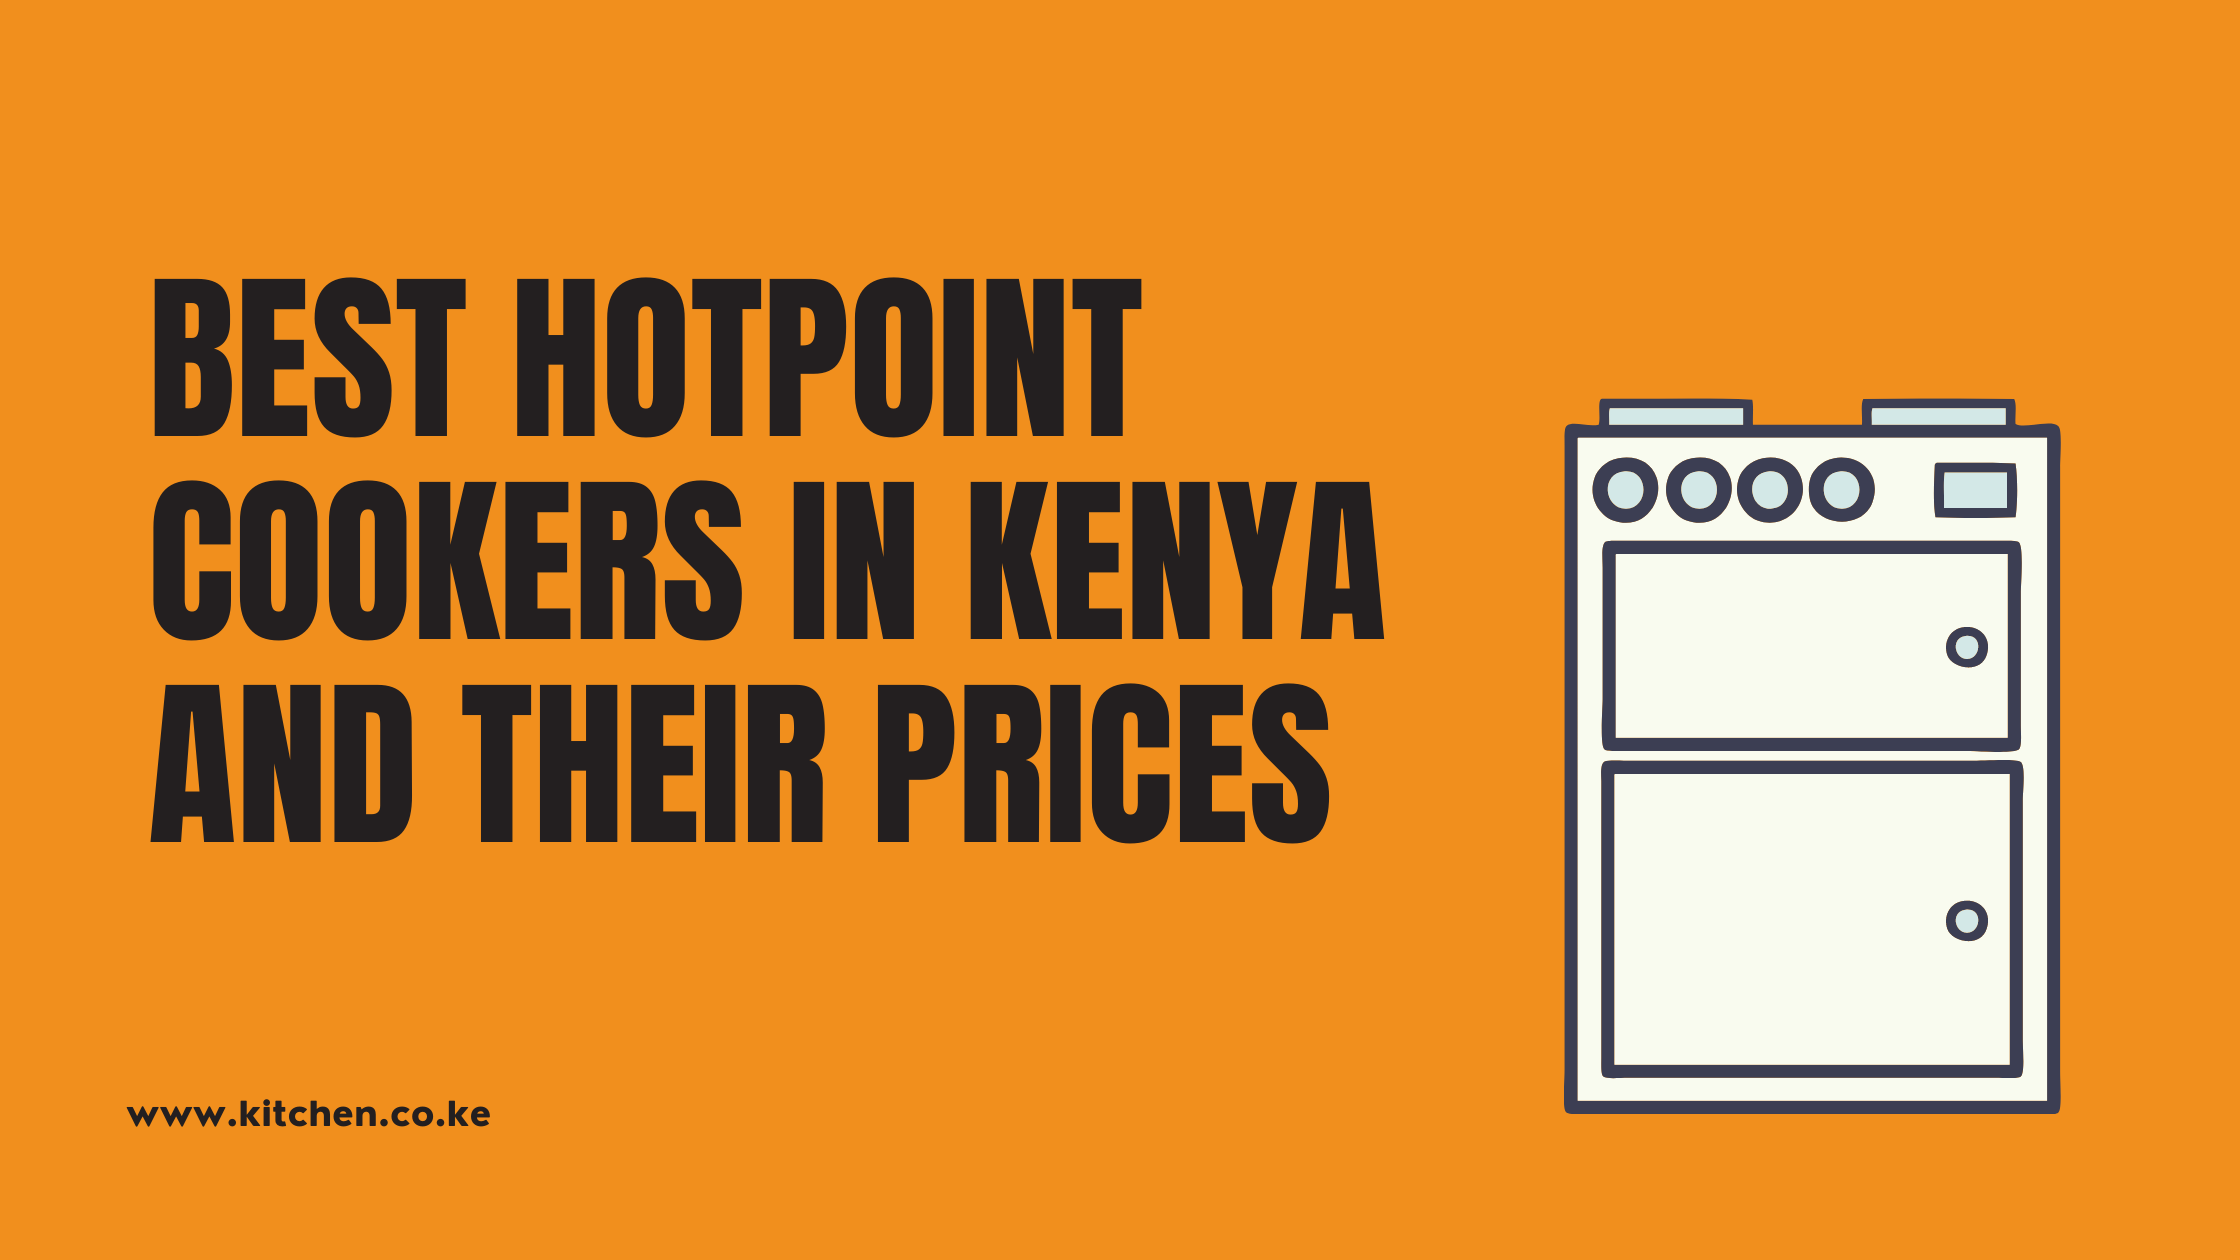 Best Hotpoint Cookers In Kenya And Their Prices 2022